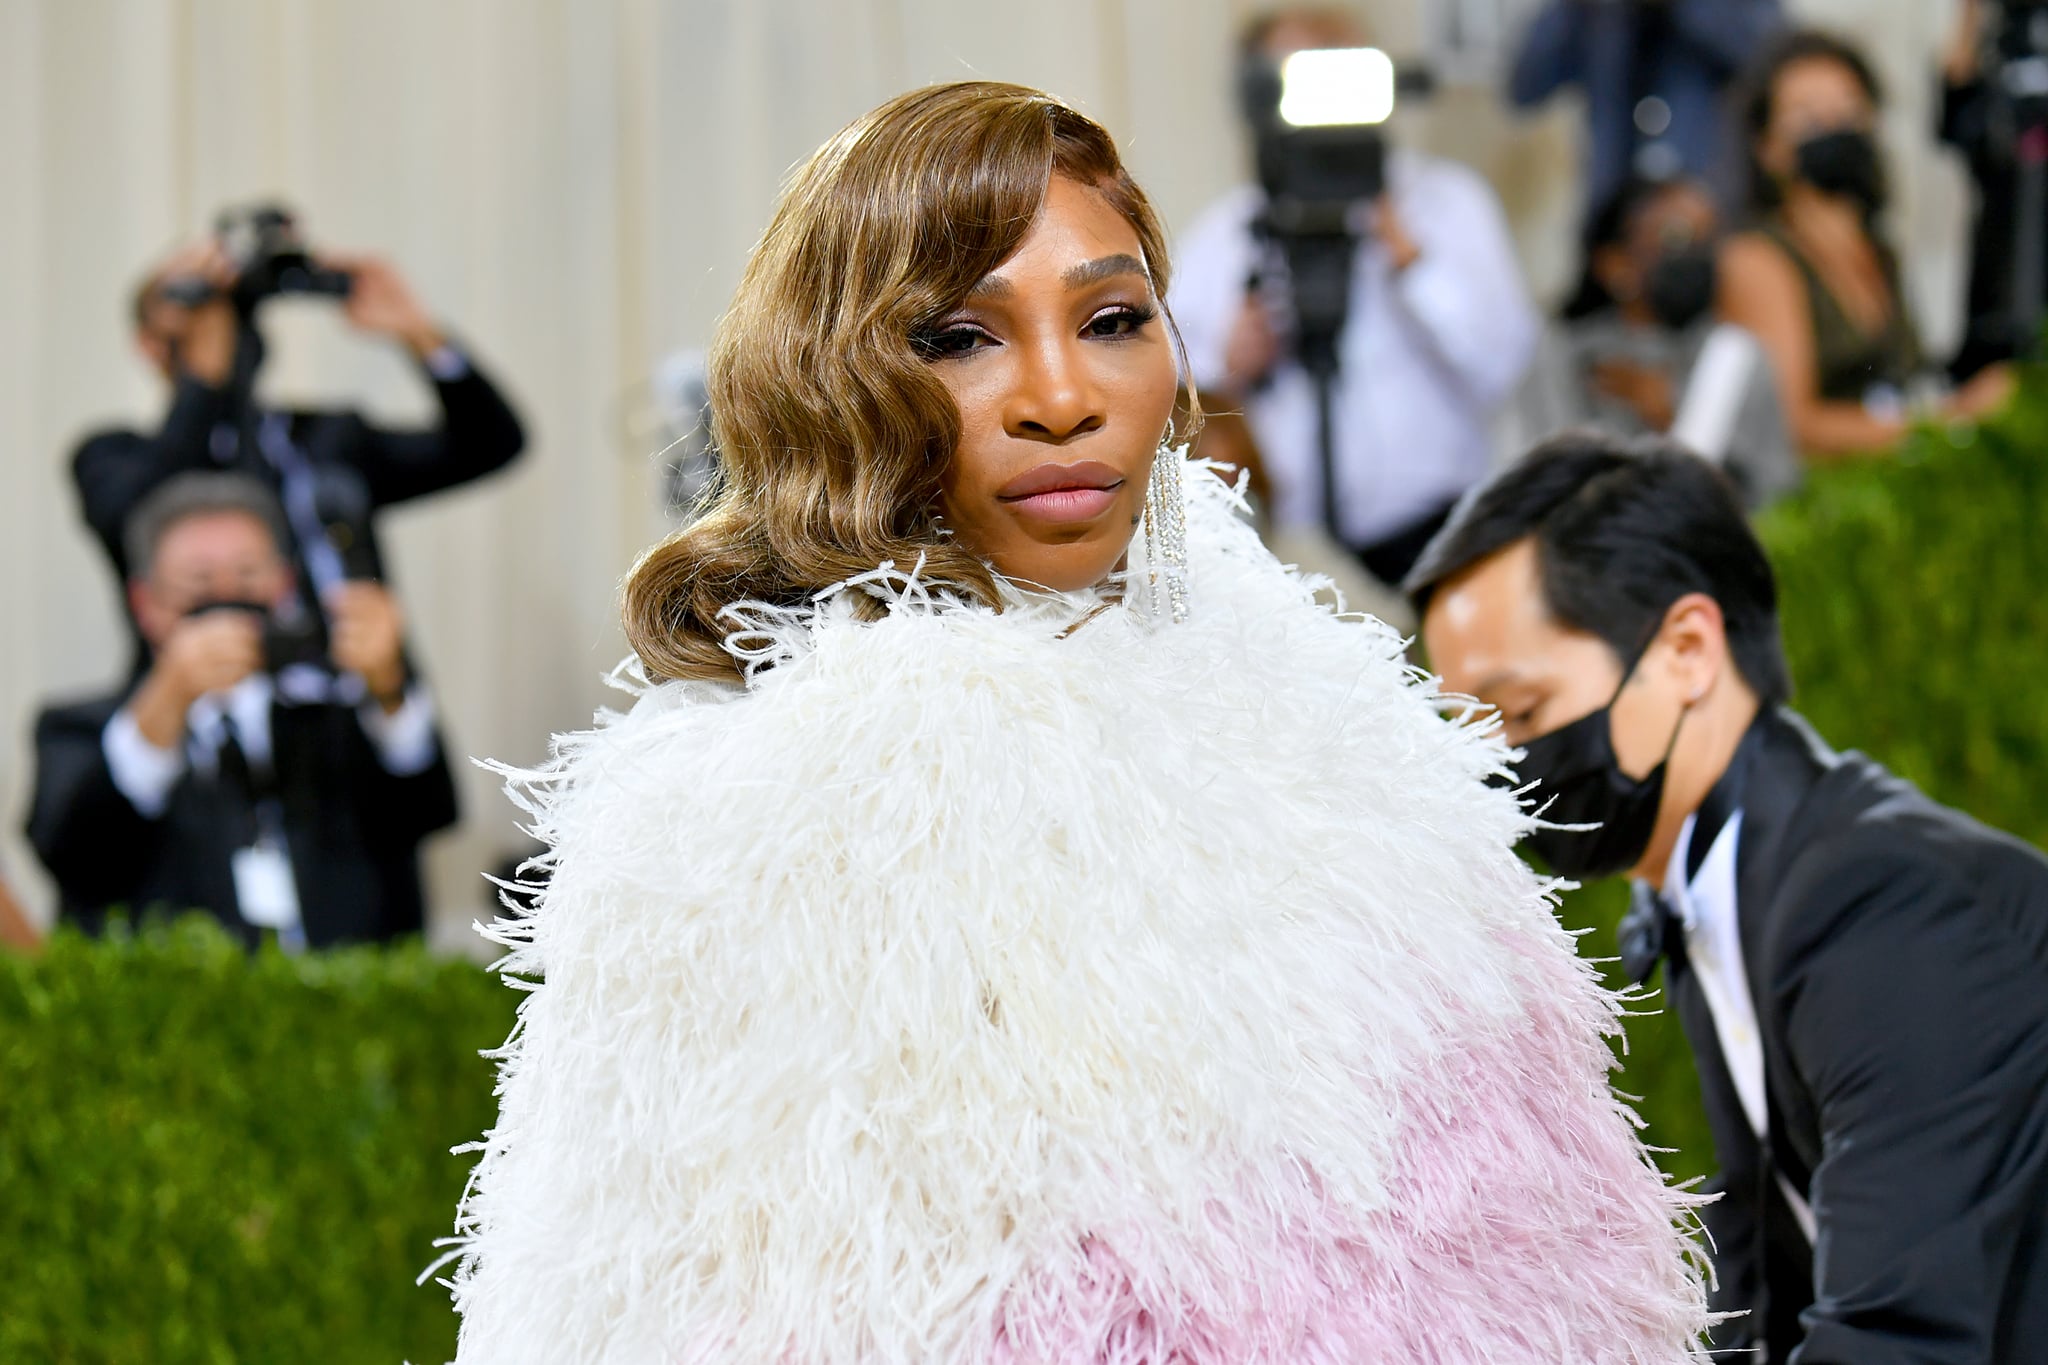 NEW YORK, NEW YORK - SEPTEMBER 13: Serena Williams attends The 2021 Met Gala Celebrating In America: A Lexicon Of Fashion at Metropolitan Museum of Art on September 13, 2021 in New York City. (Photo by Jeff Kravitz/FilmMagic)